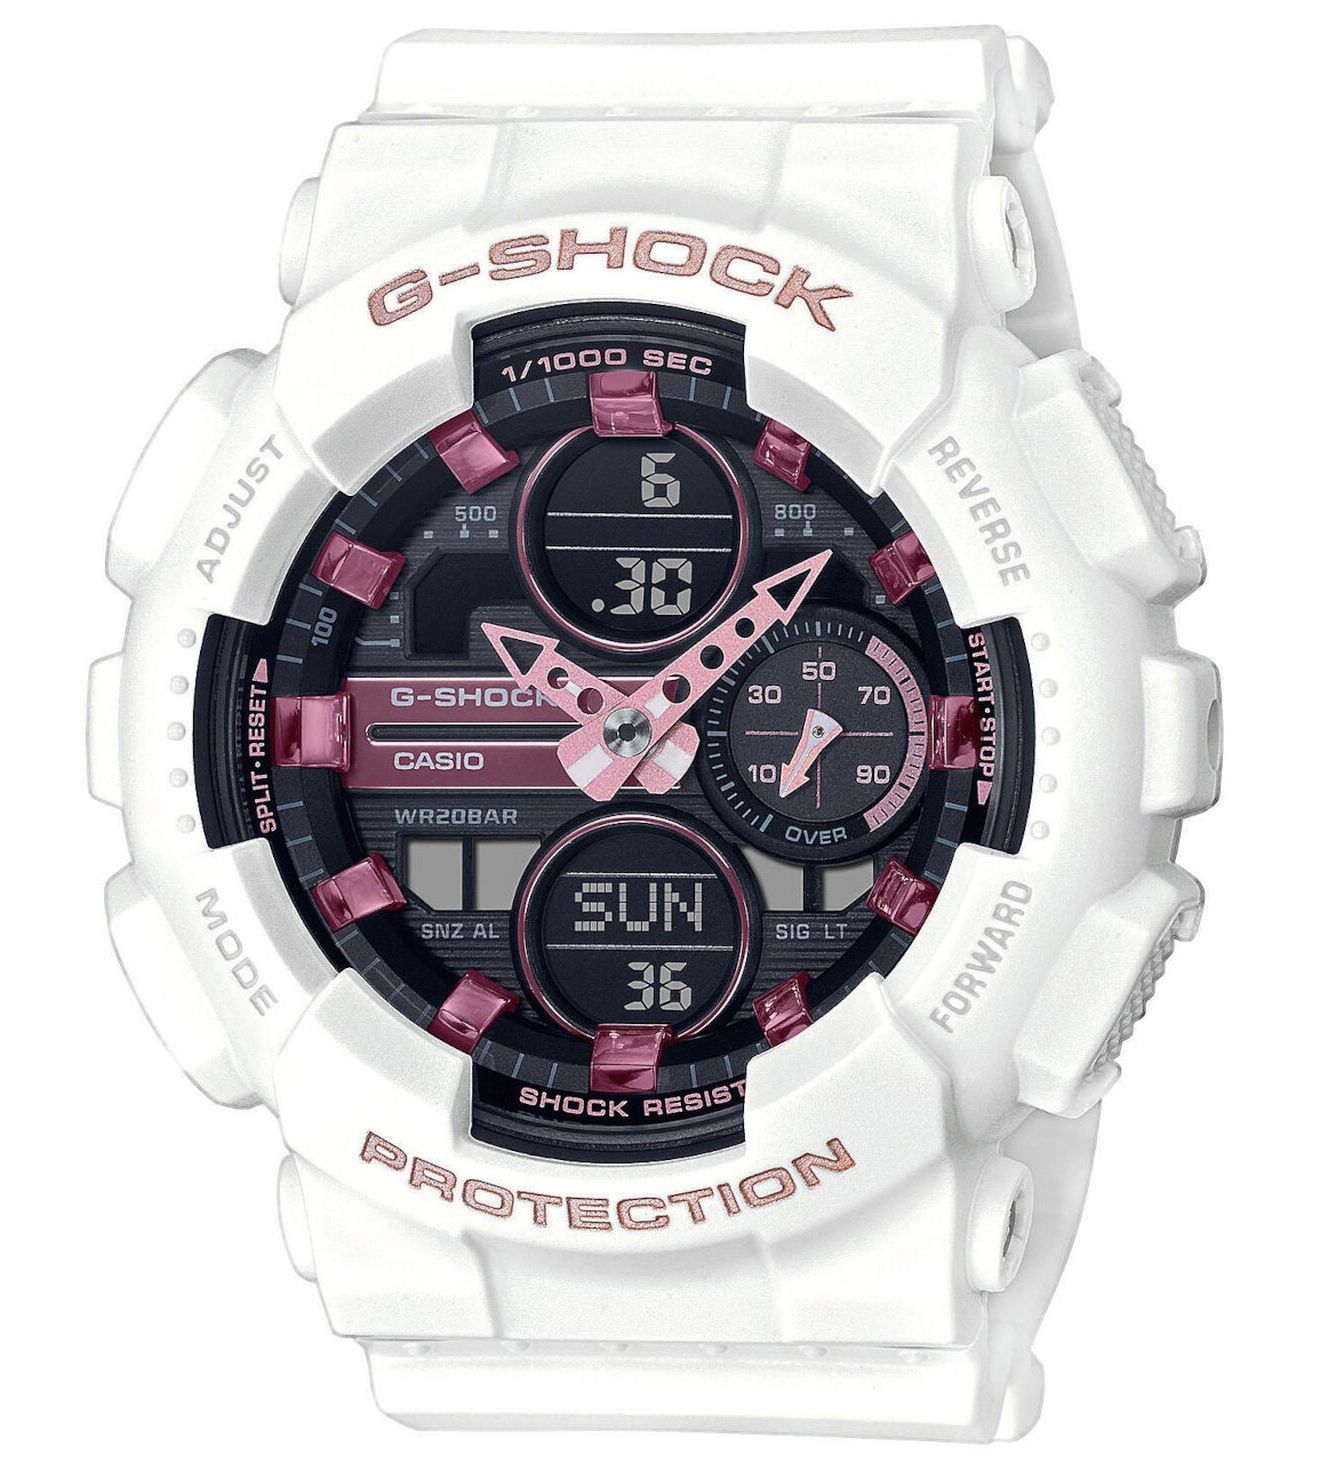 This Casio G-shock Analogue-Digital Watch for Women is the perfect timepiece to wear or to gift. It's White 42 mm Round case combined with the comfortable White Plastic watch band will ensure you enjoy this stunning timepiece without any compromise. Operated by a high quality Quartz movement and water resistant to 20 bars, your watch will keep ticking. This sporty and trendy watch is a perfect gift for New Year, birthday,valentine's day and so on -The watch has a Calendar function: Day-Date, Stop Watch, Worldtime, Timer, Alarm, Light High quality 19 cm length and 24 mm width White Plastic strap with a Buckle Case diameter: 42 mm,case thickness: 14 mm, case colour: White and dial colour: Black